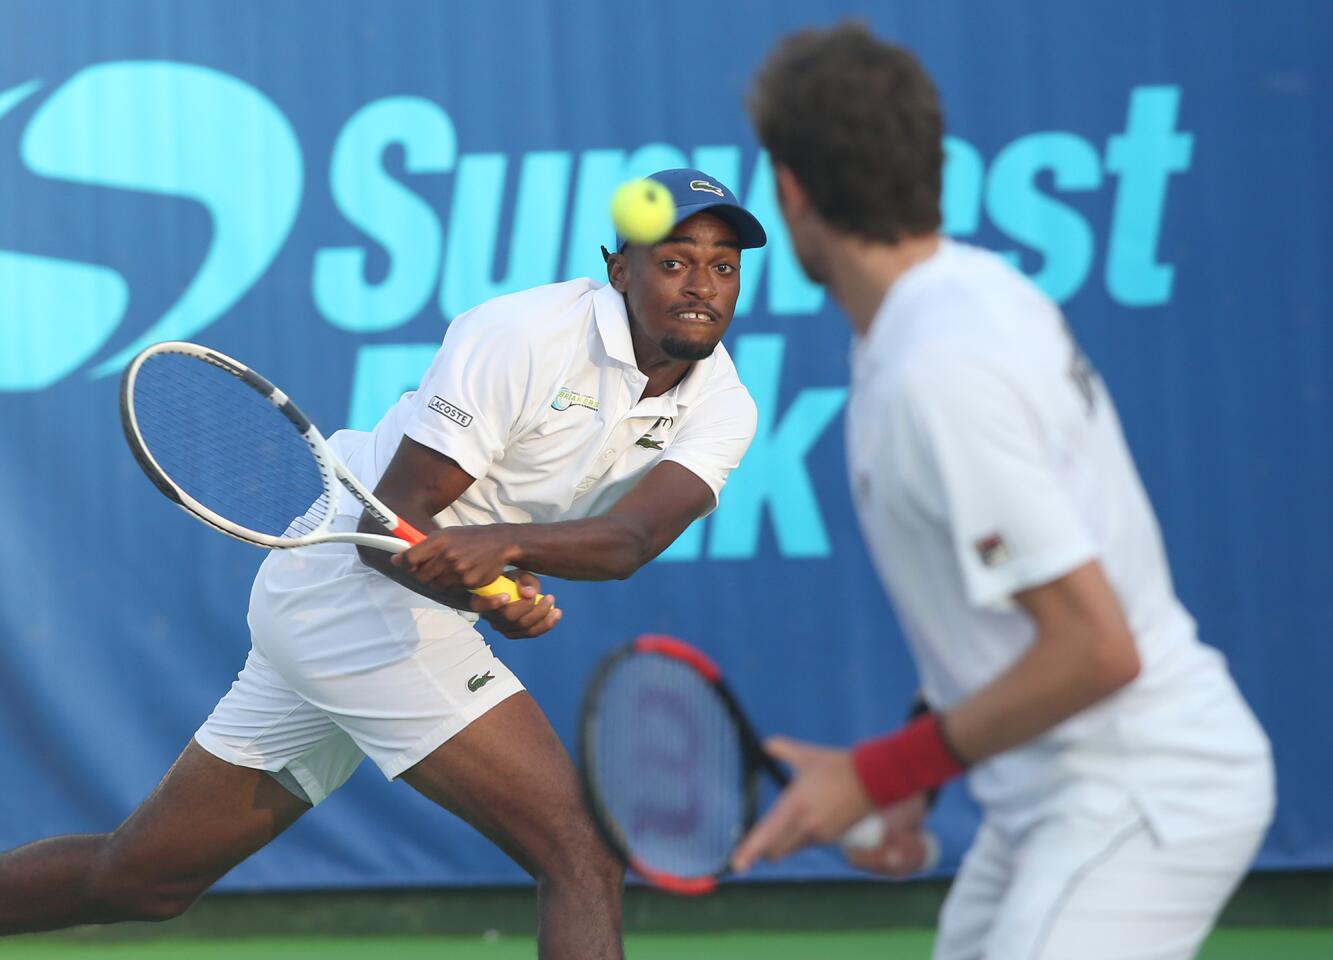 Orange County Breakers player Darian King runs down a backhand at the baseline as partner Marcelo Demoliner looks on during WTT men's doubles match against the Springfield Lasers on Wednesday at Palisades Tennis Club.